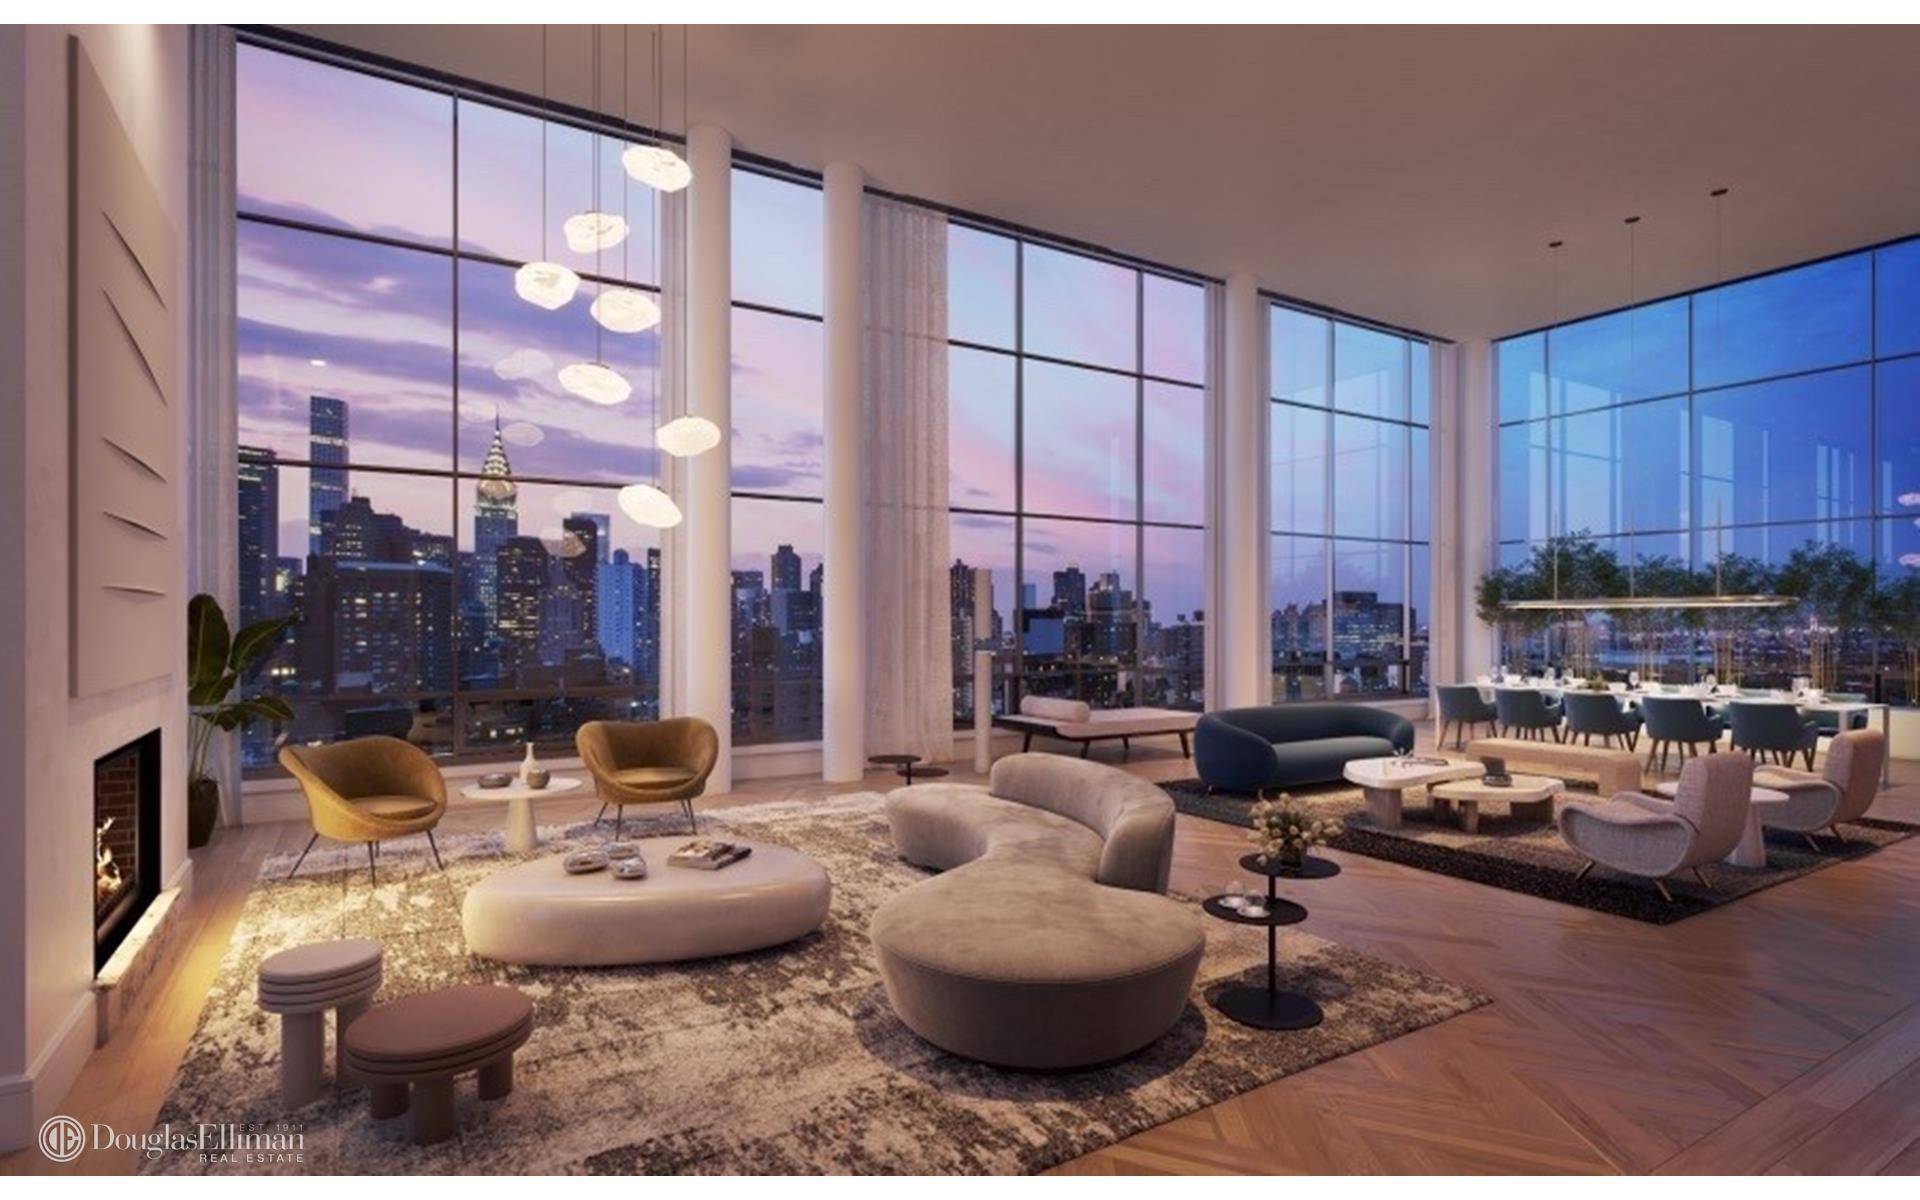 Located at 215 East 19th Street, The Tower offers a distinct collection of 130 loft like studio to five bedroom residences.